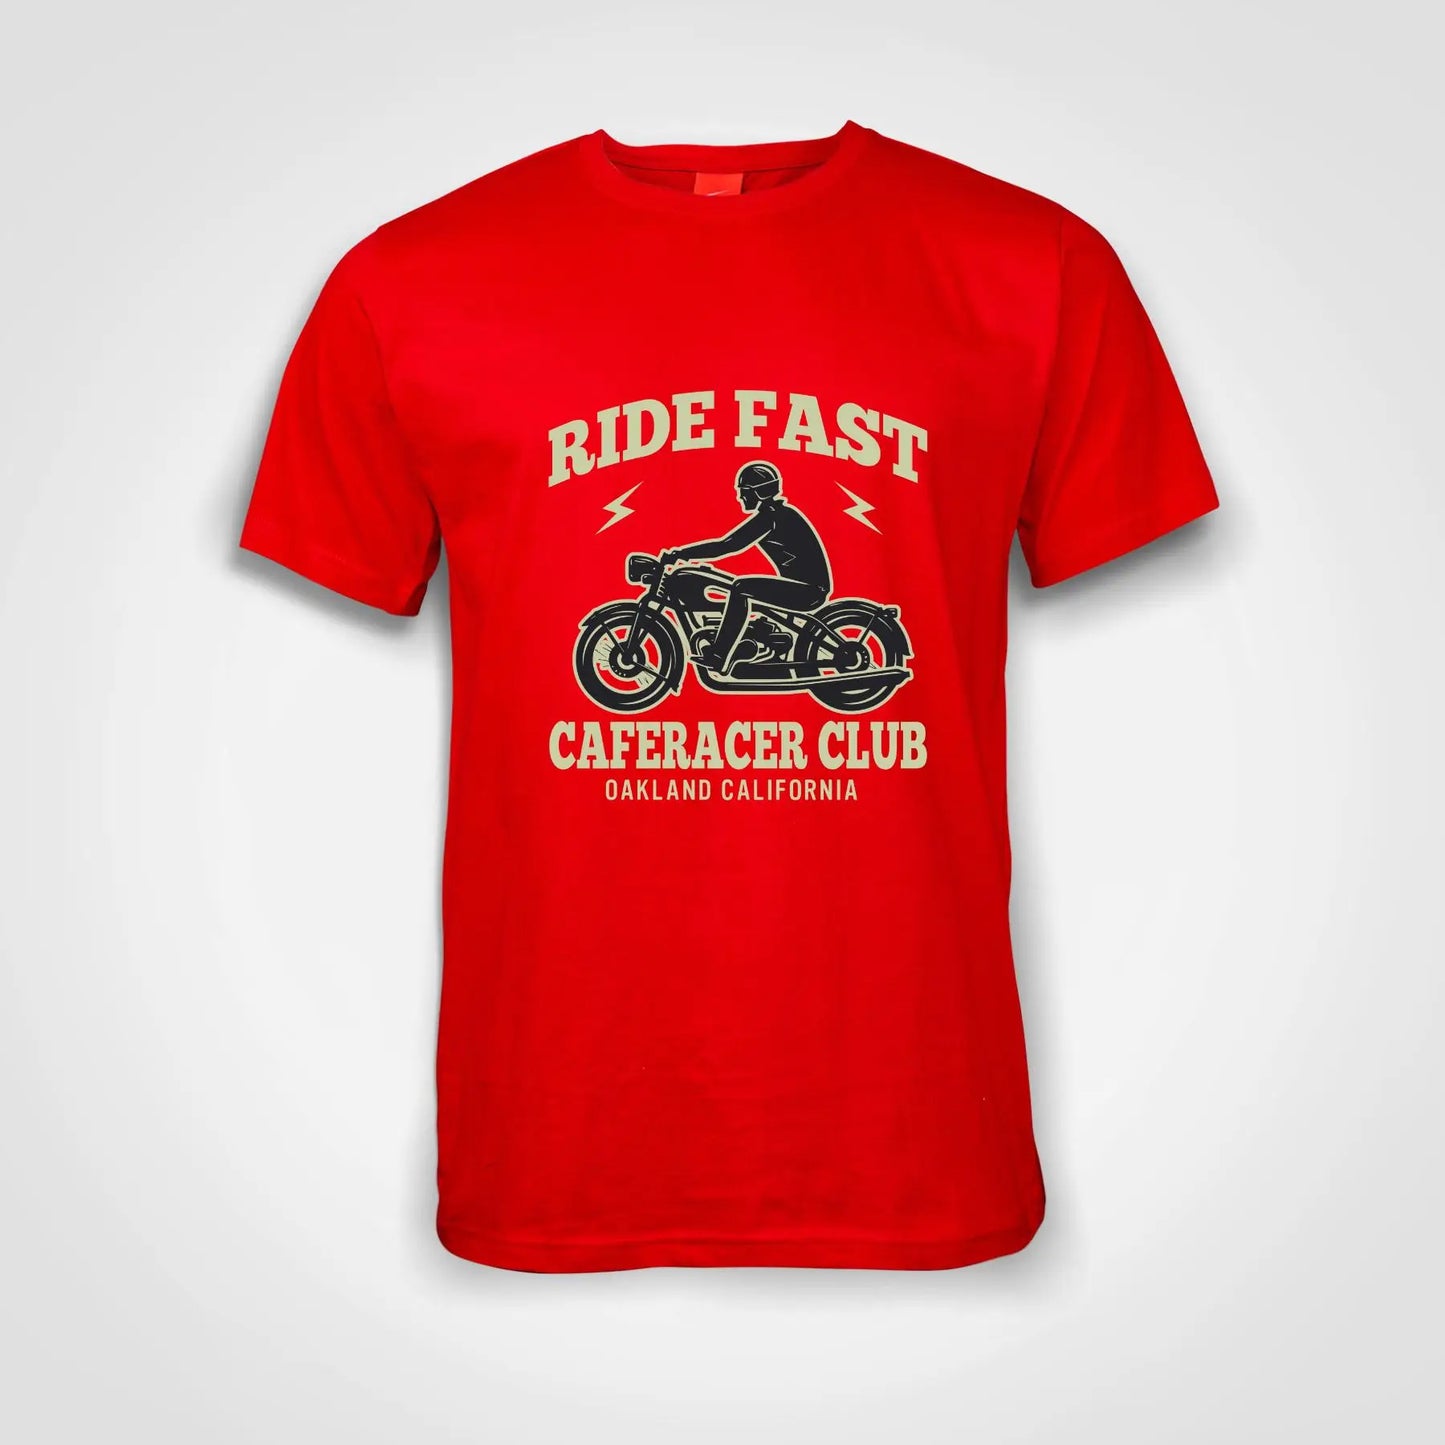 Ride Fast CafeRacer Club Cotton T-Shirt Red IZZIT APPAREL